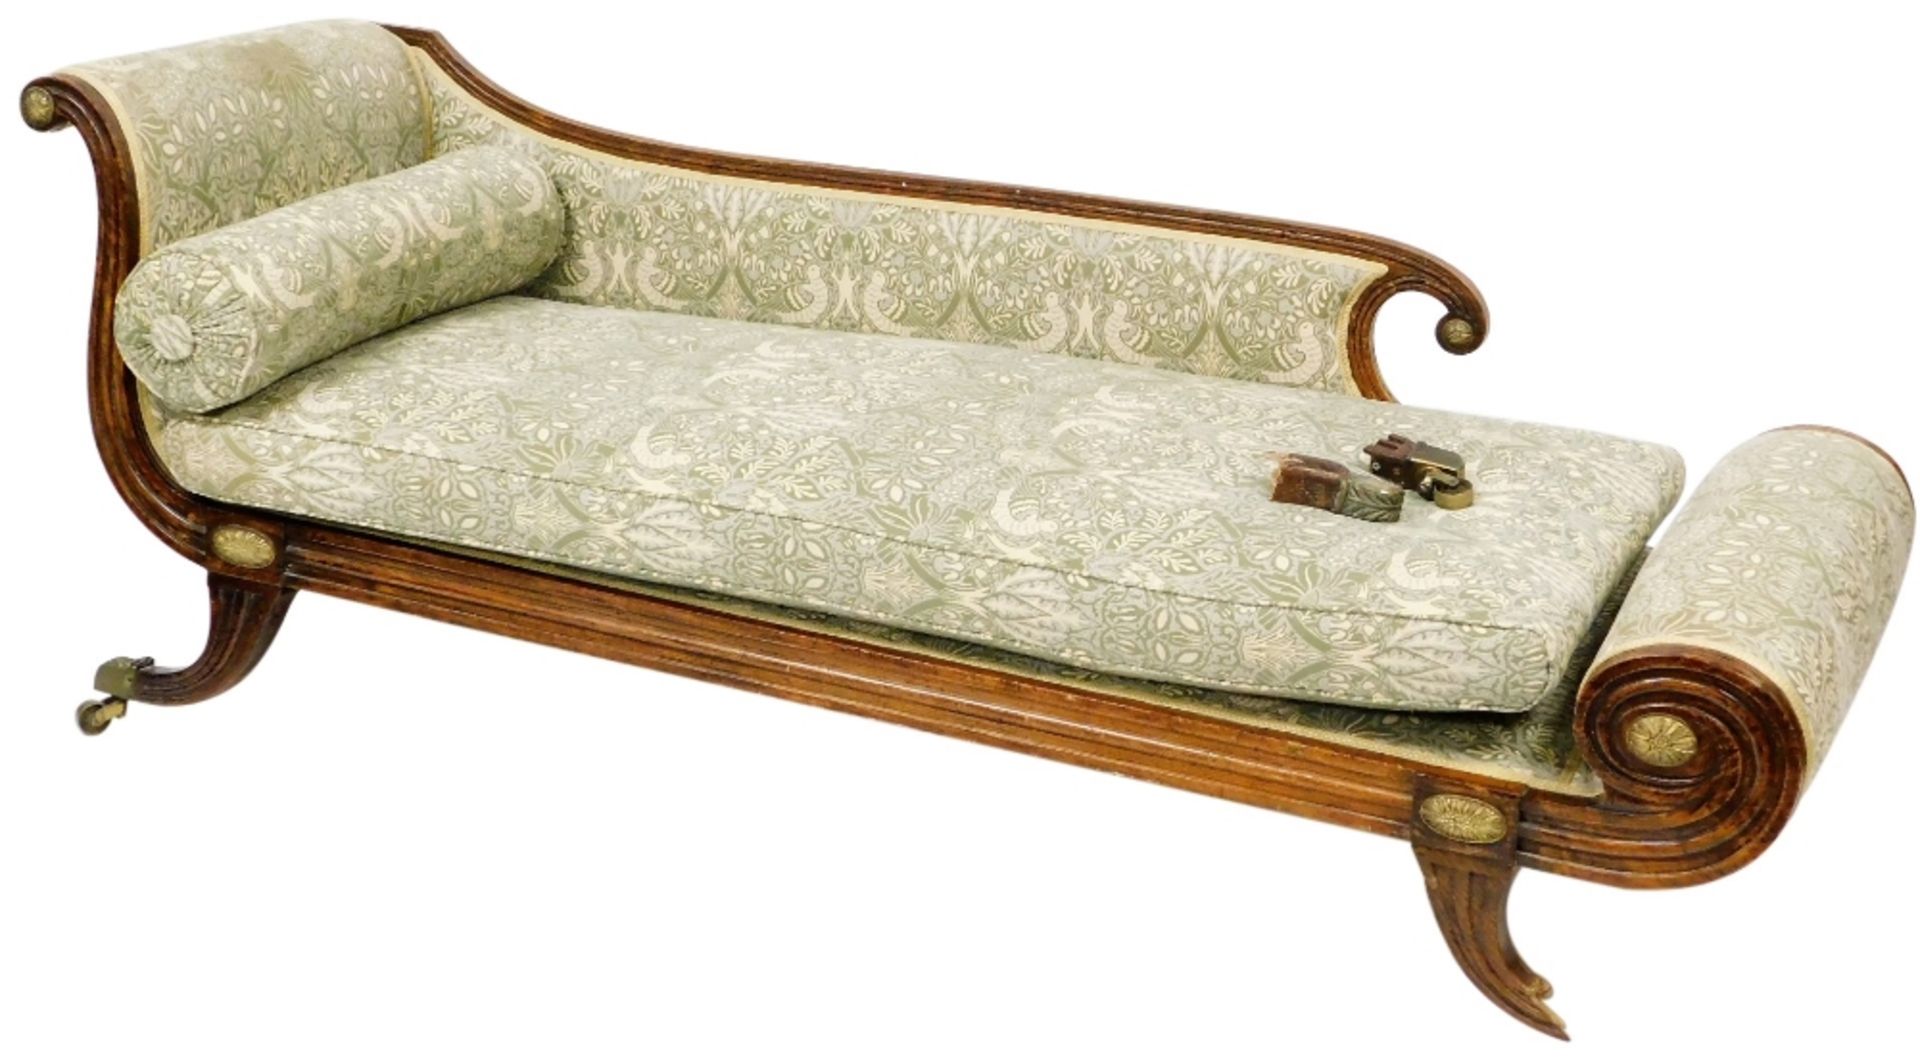 An Empire style oak framed chaise longue, upholstered in green fabric decorated with birds and flowe